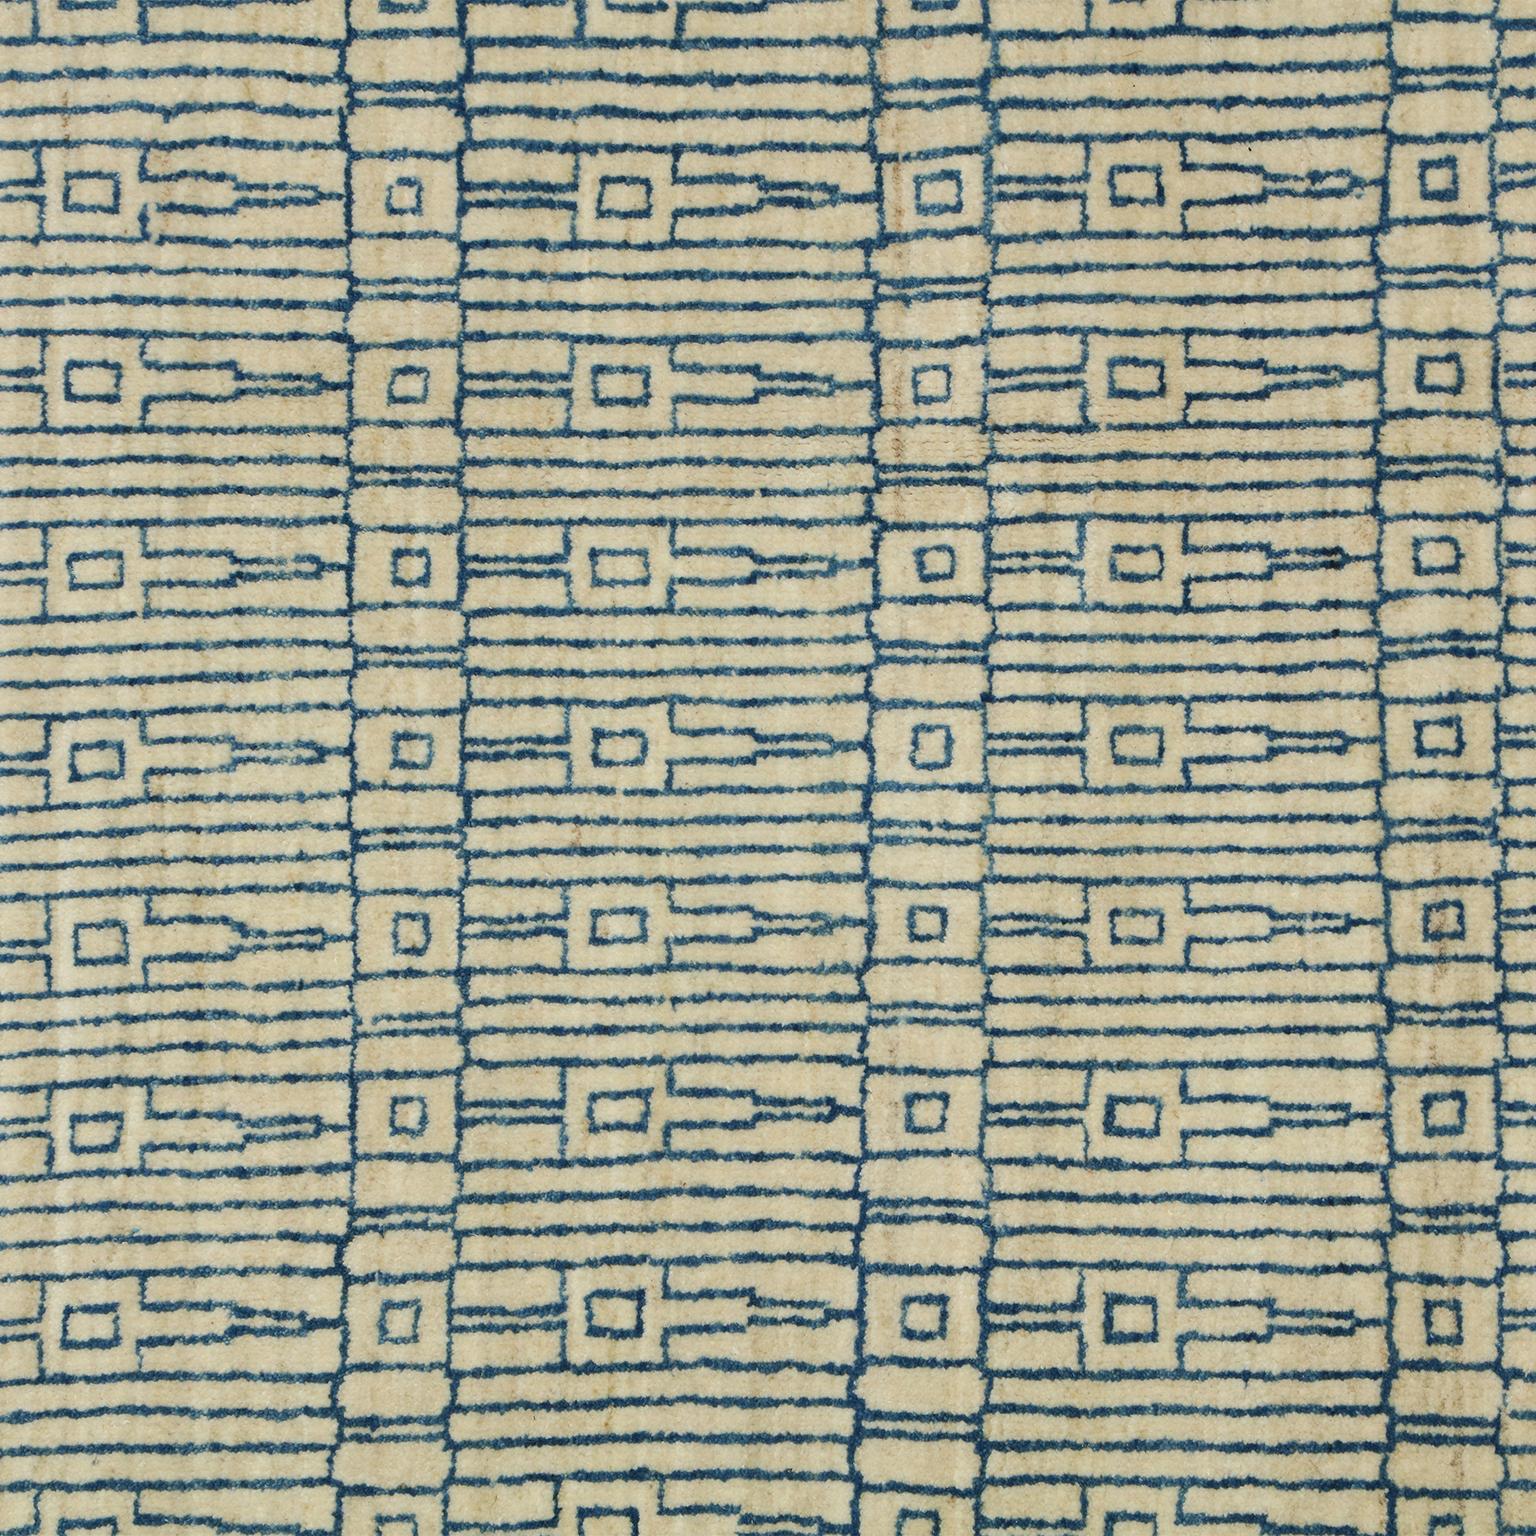 This modern carpet, with an architectural design in blue on a cream background, utilizes handspun wool and vegetable dyes. This pure wool area rug, created by the artisans of Orley Shabahang, is approximately 8' x 10', a versatile size perfect for